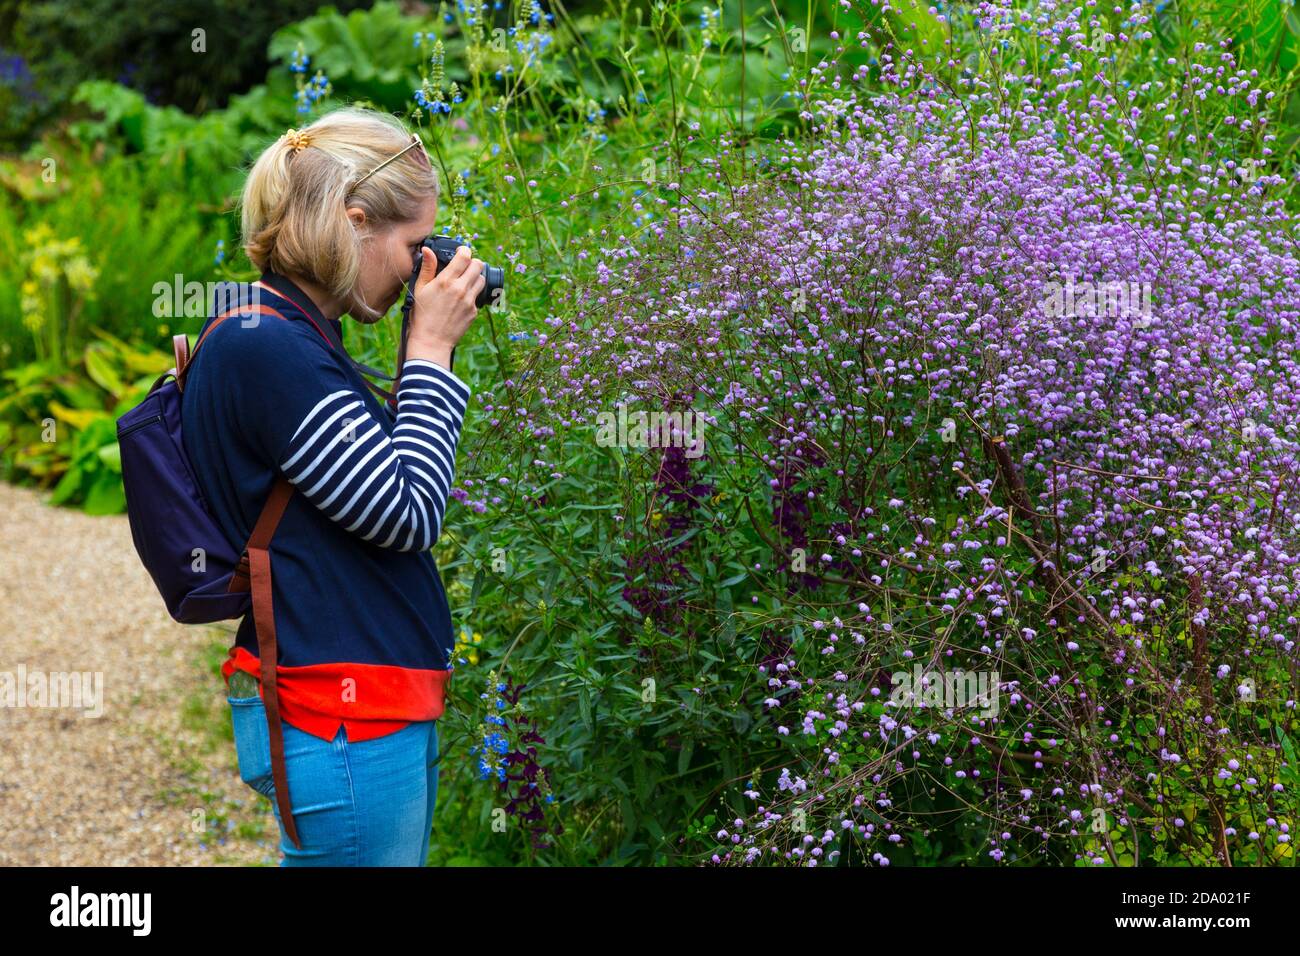 Young woman taking photographs of flowers Stock Photo